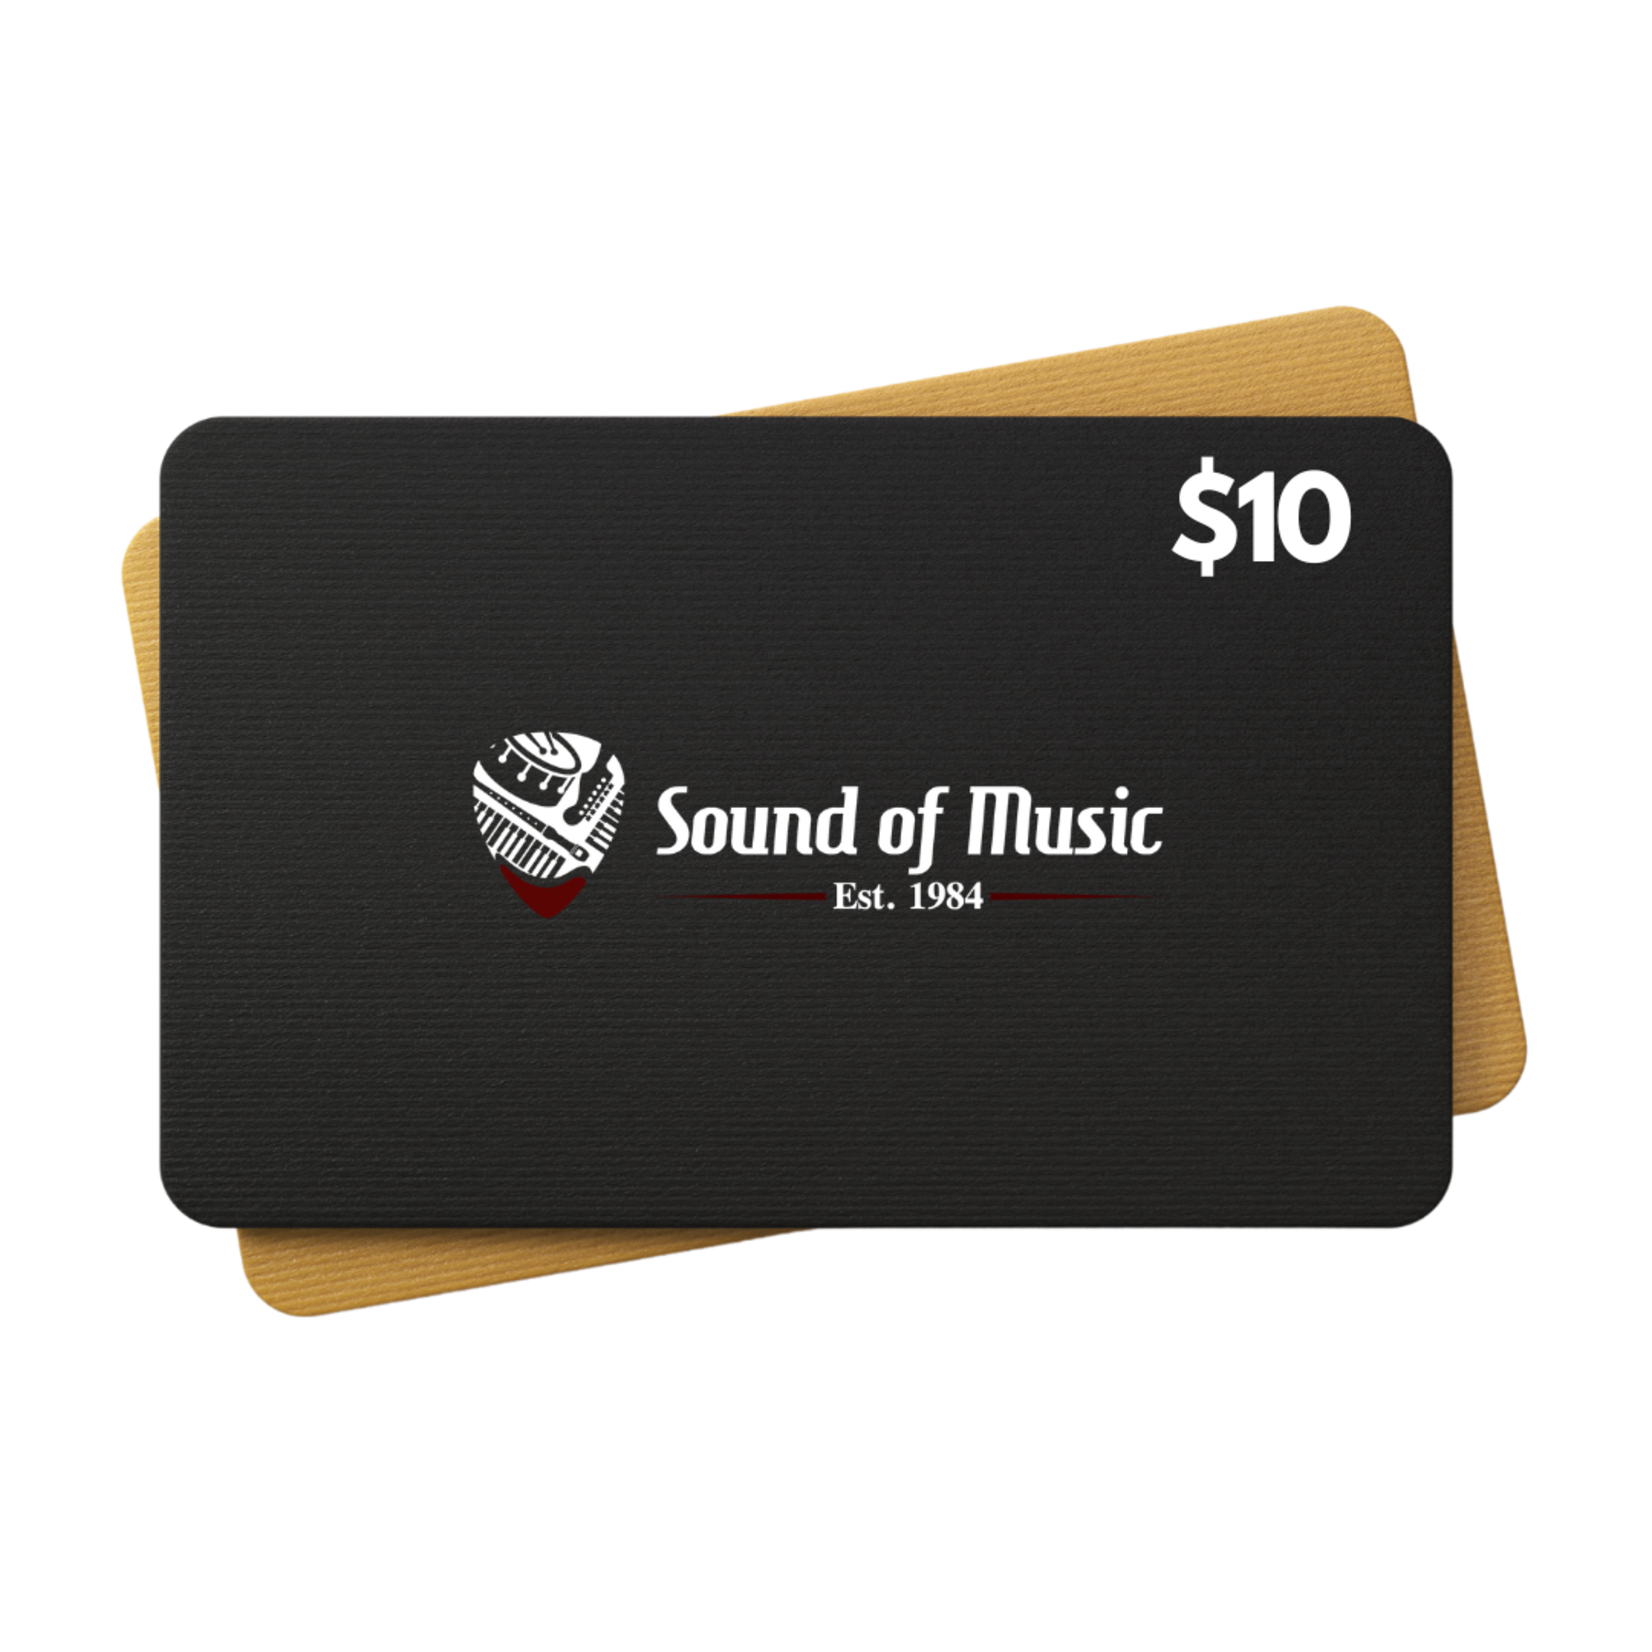 Sound of Music Gift Card - $10